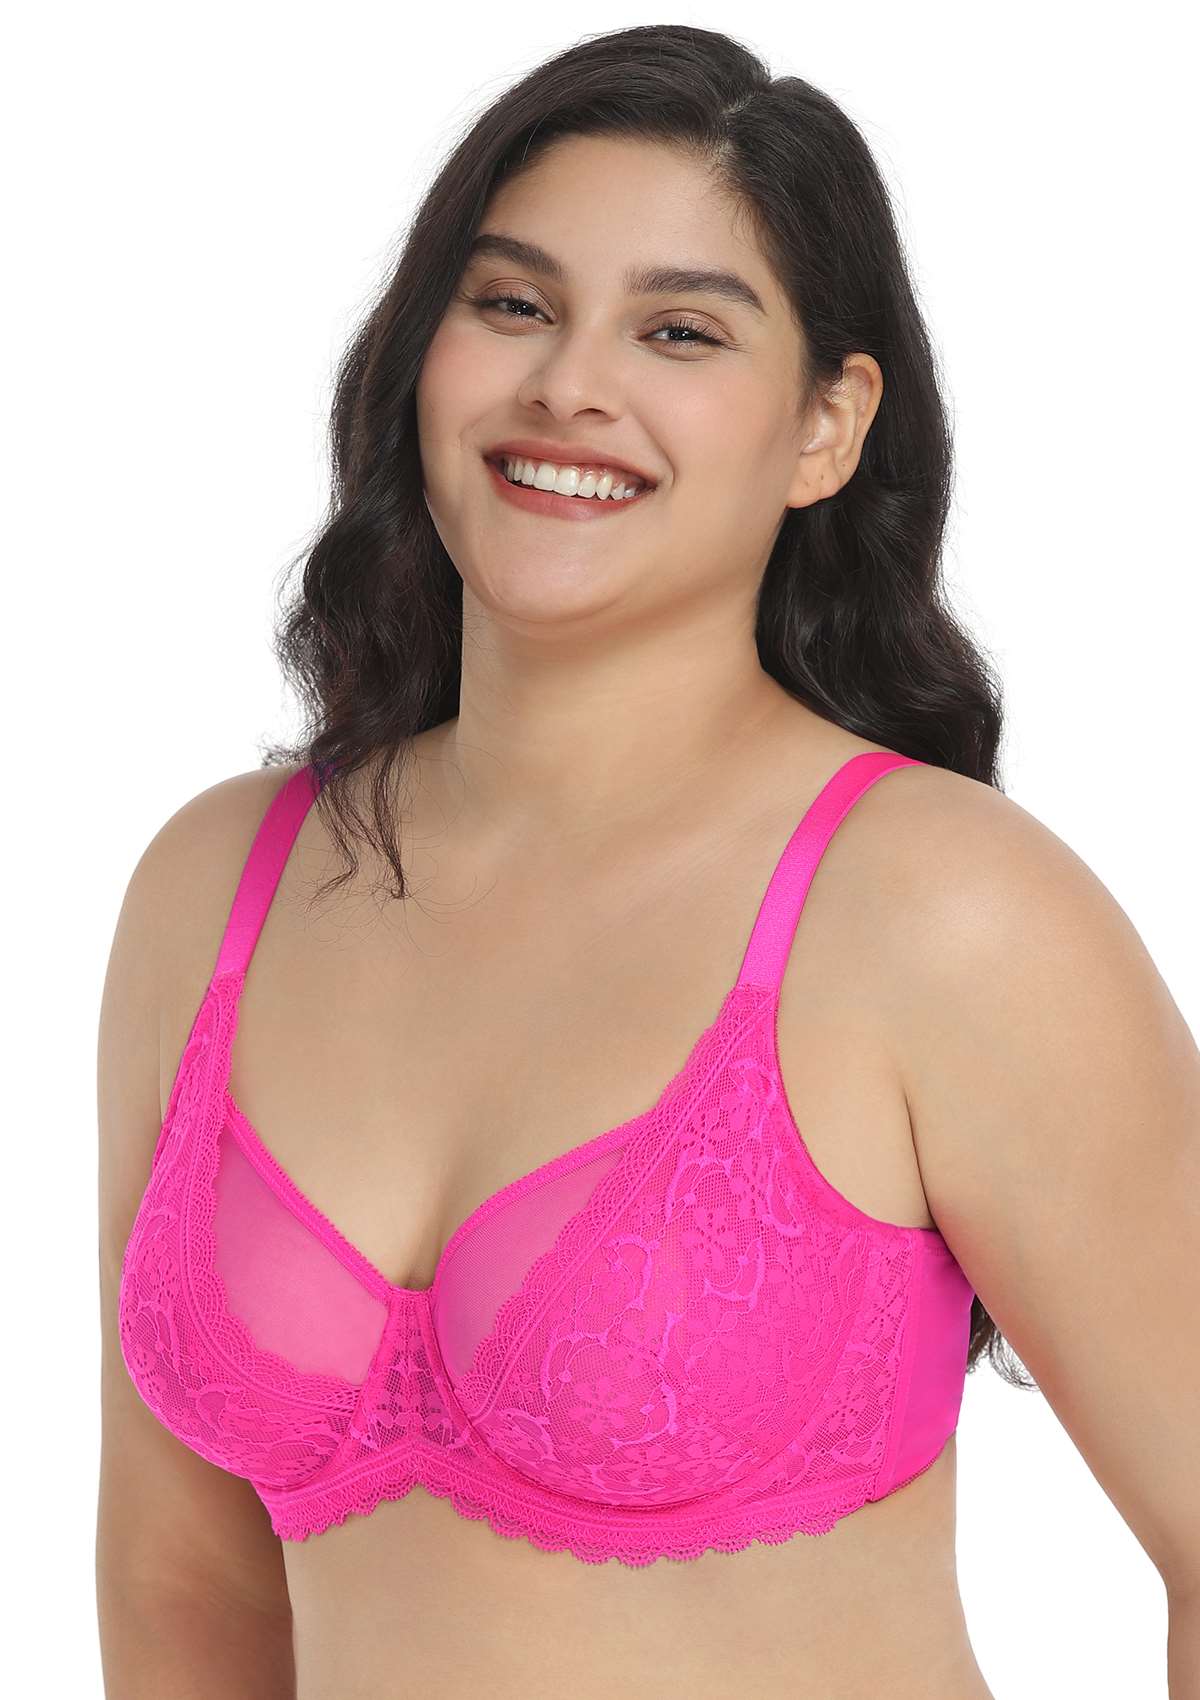 HSIA Anemone Lace Unlined Bra: Supportive, Lightweight Bra - Ginger / 42 / D